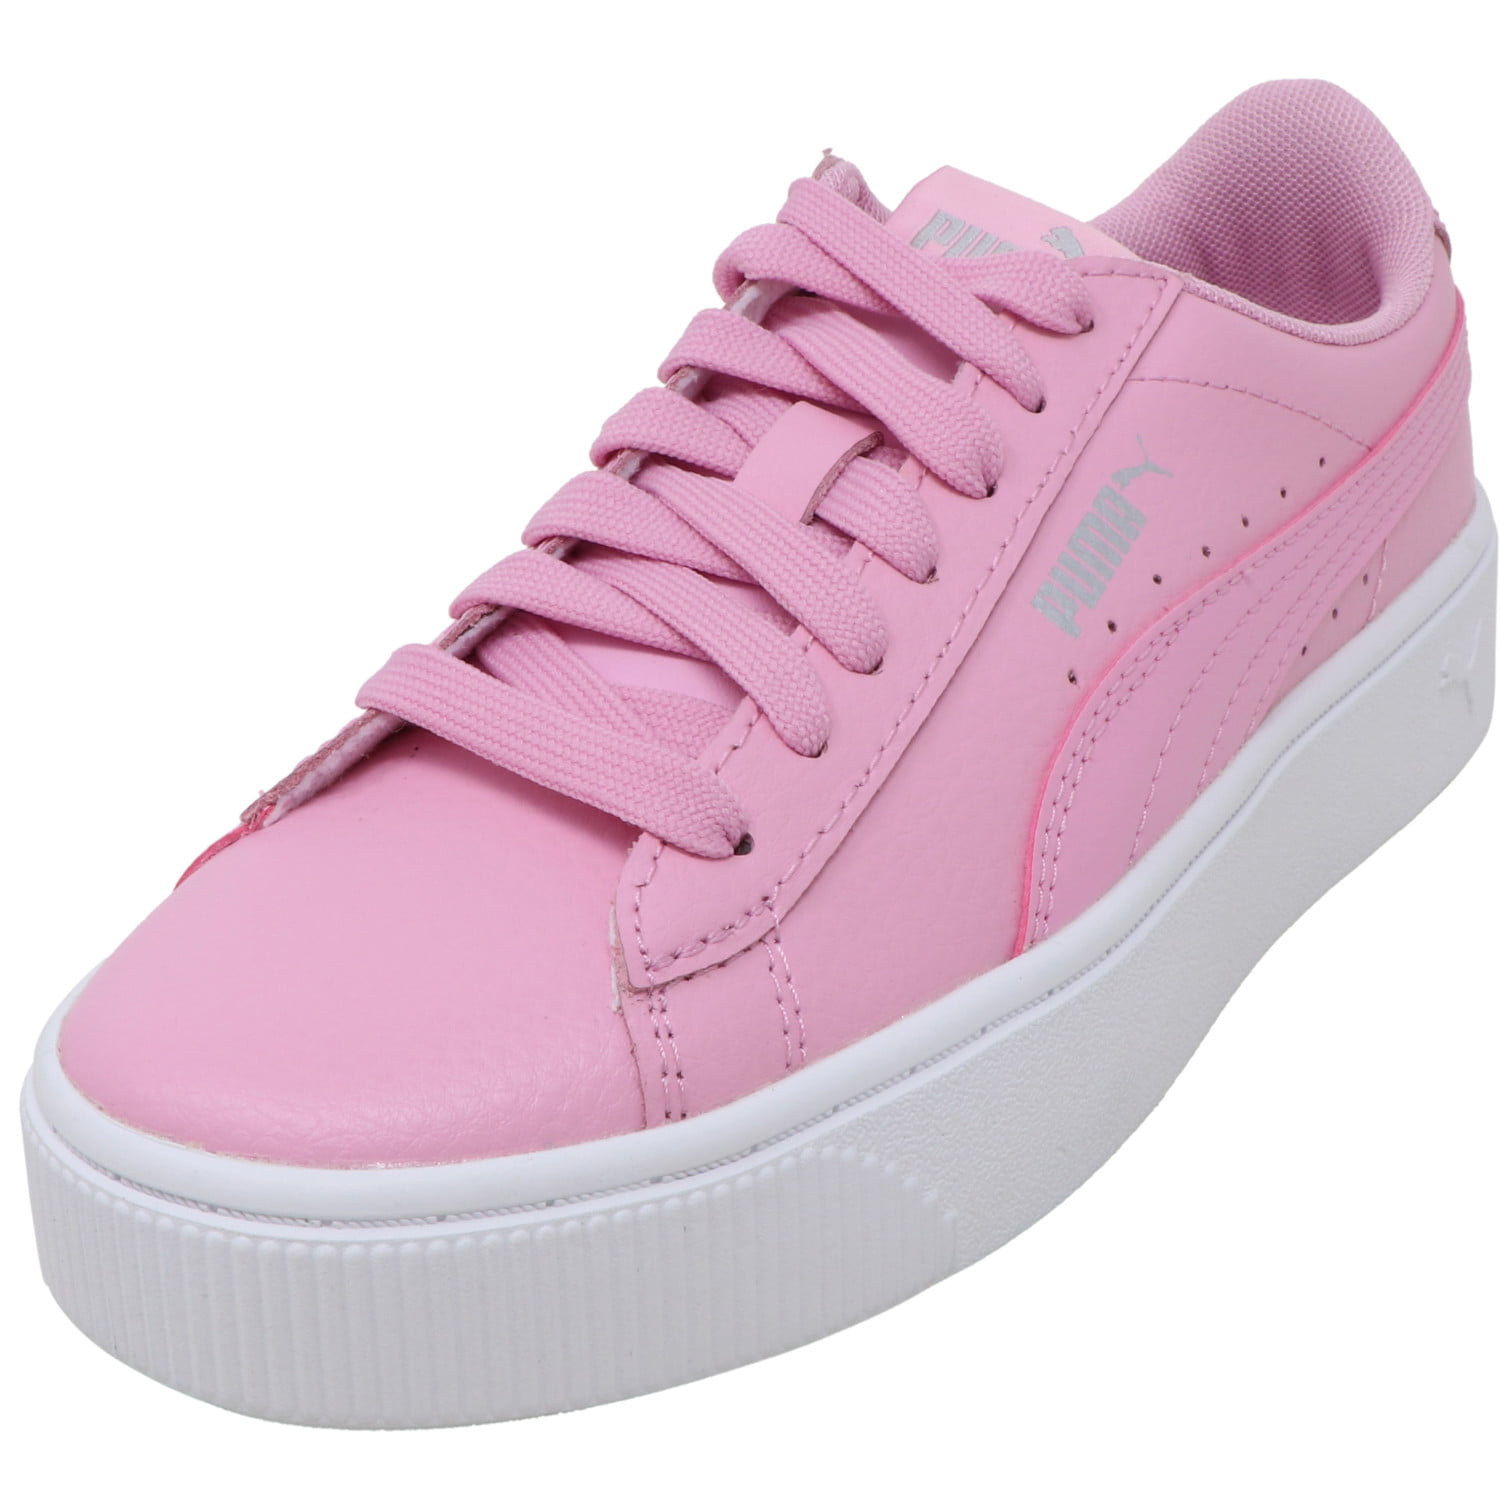 Puma Women's Vikky Stacked L Pale Pink / Ankle-High Leather Sneaker - 5 ...